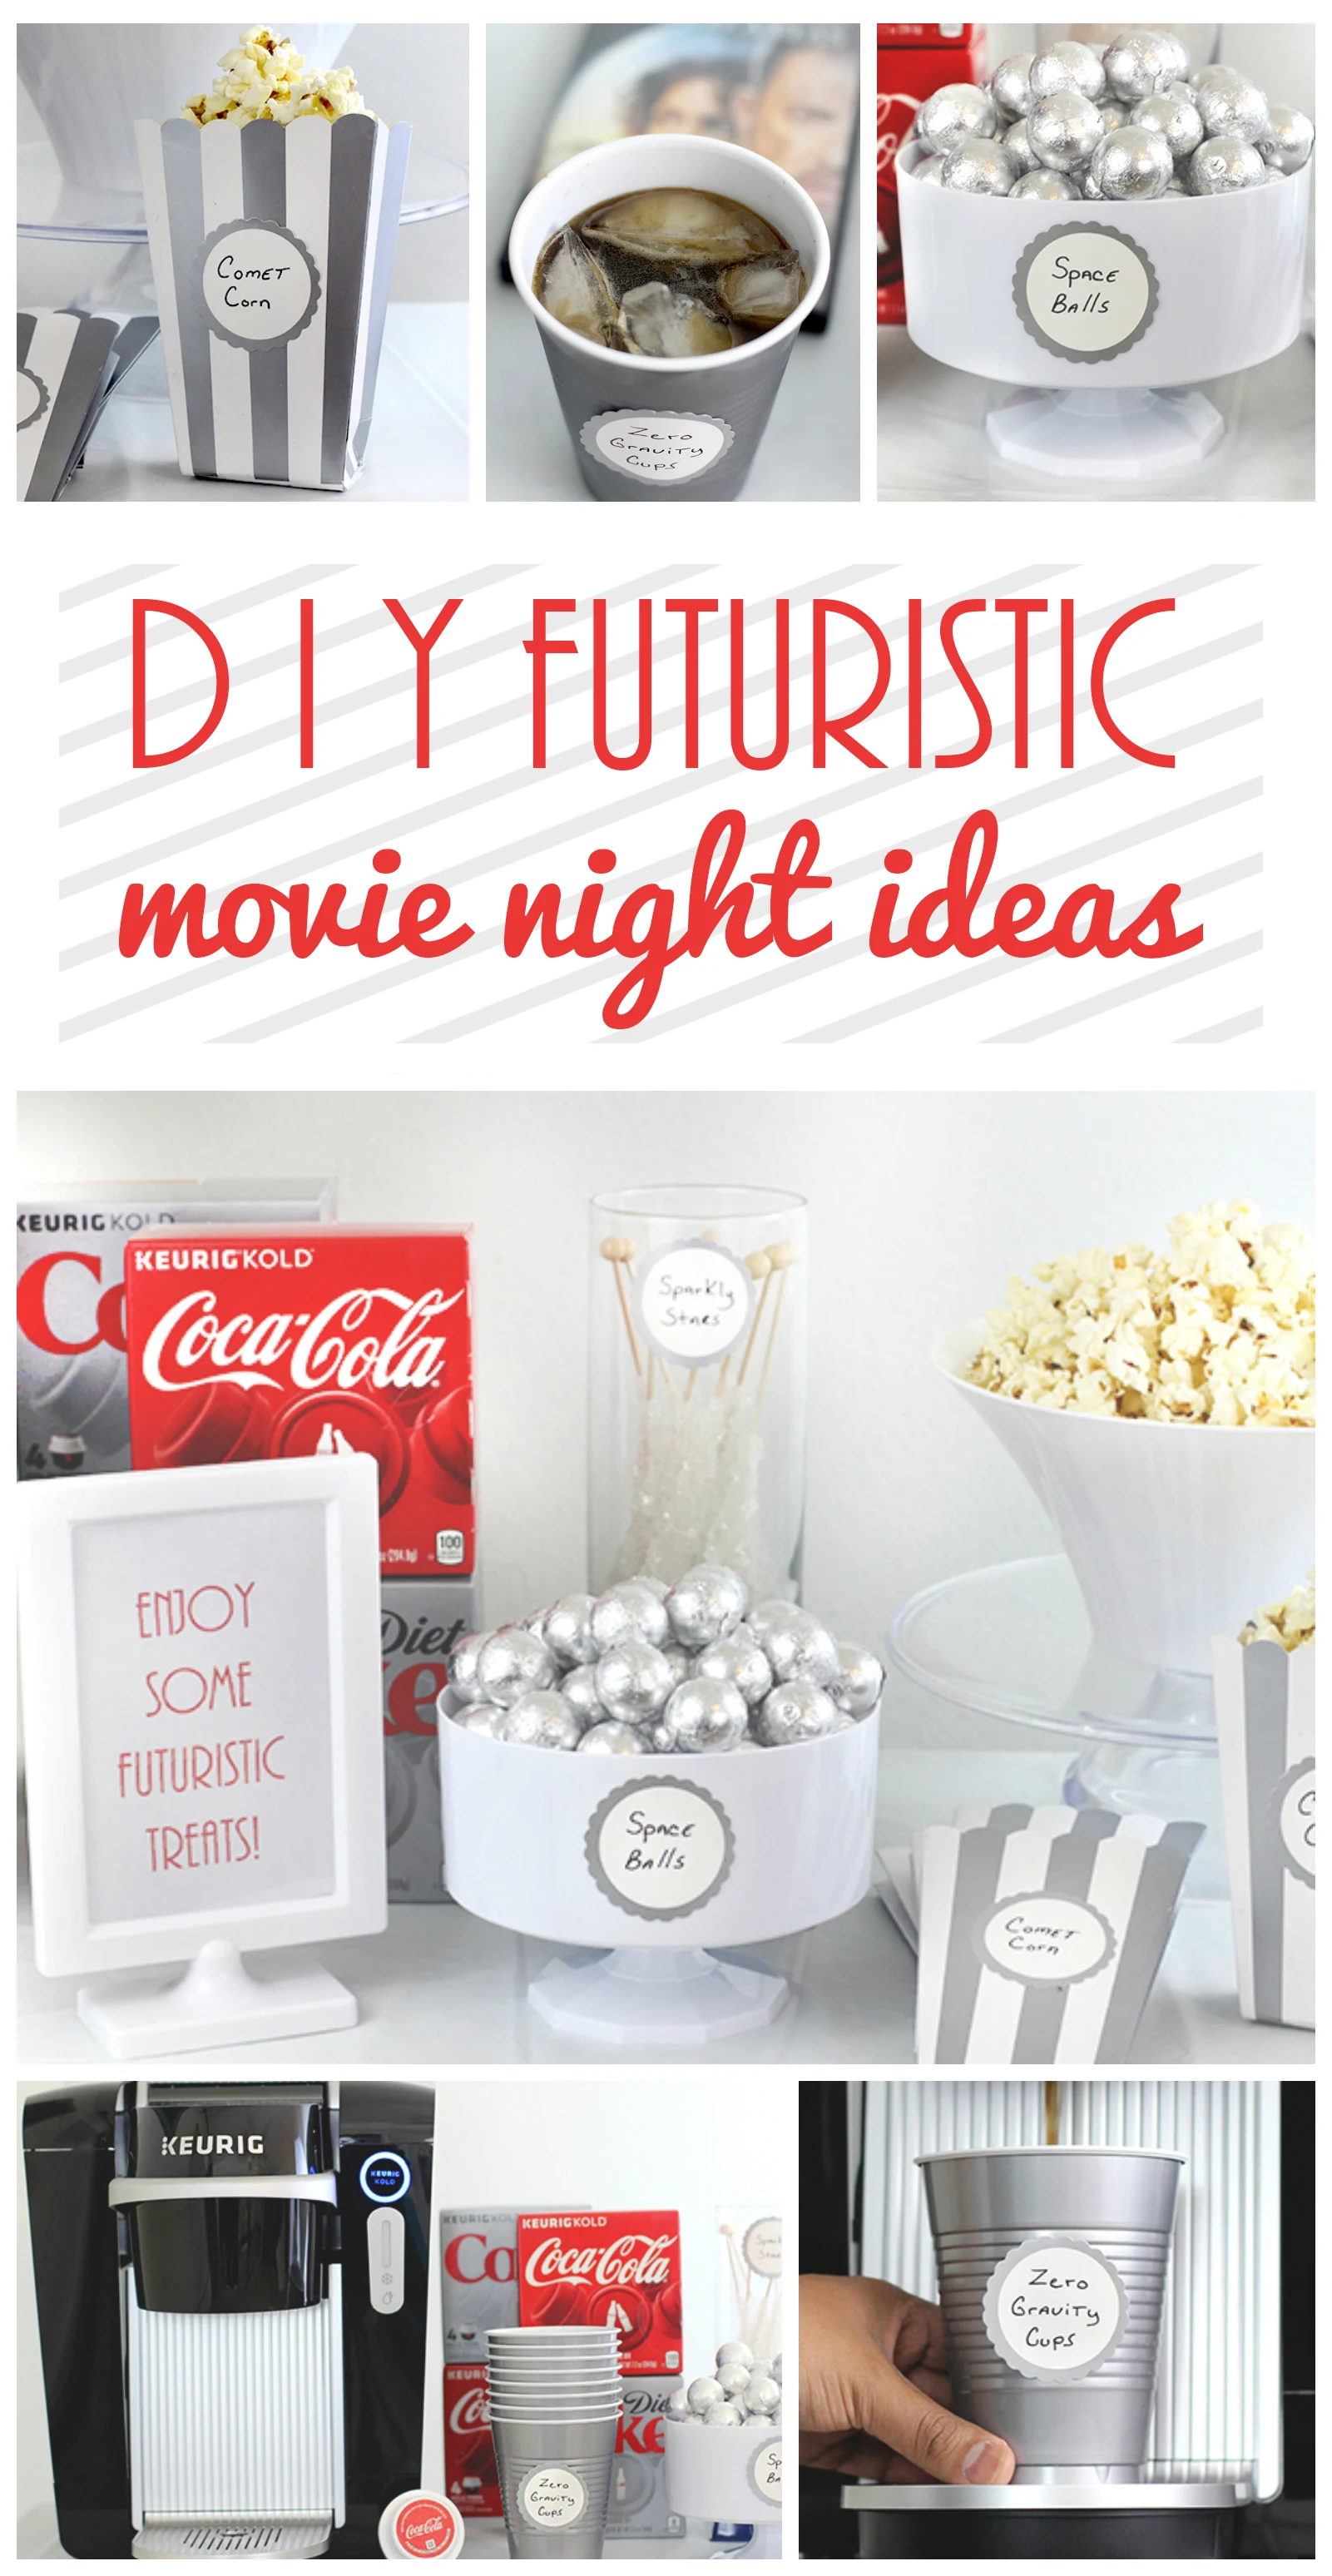 Cute futuristic movie night ideas for when you watch movies like Back to the Future, Atlas Cloud or even a Jetsons marathon. lol